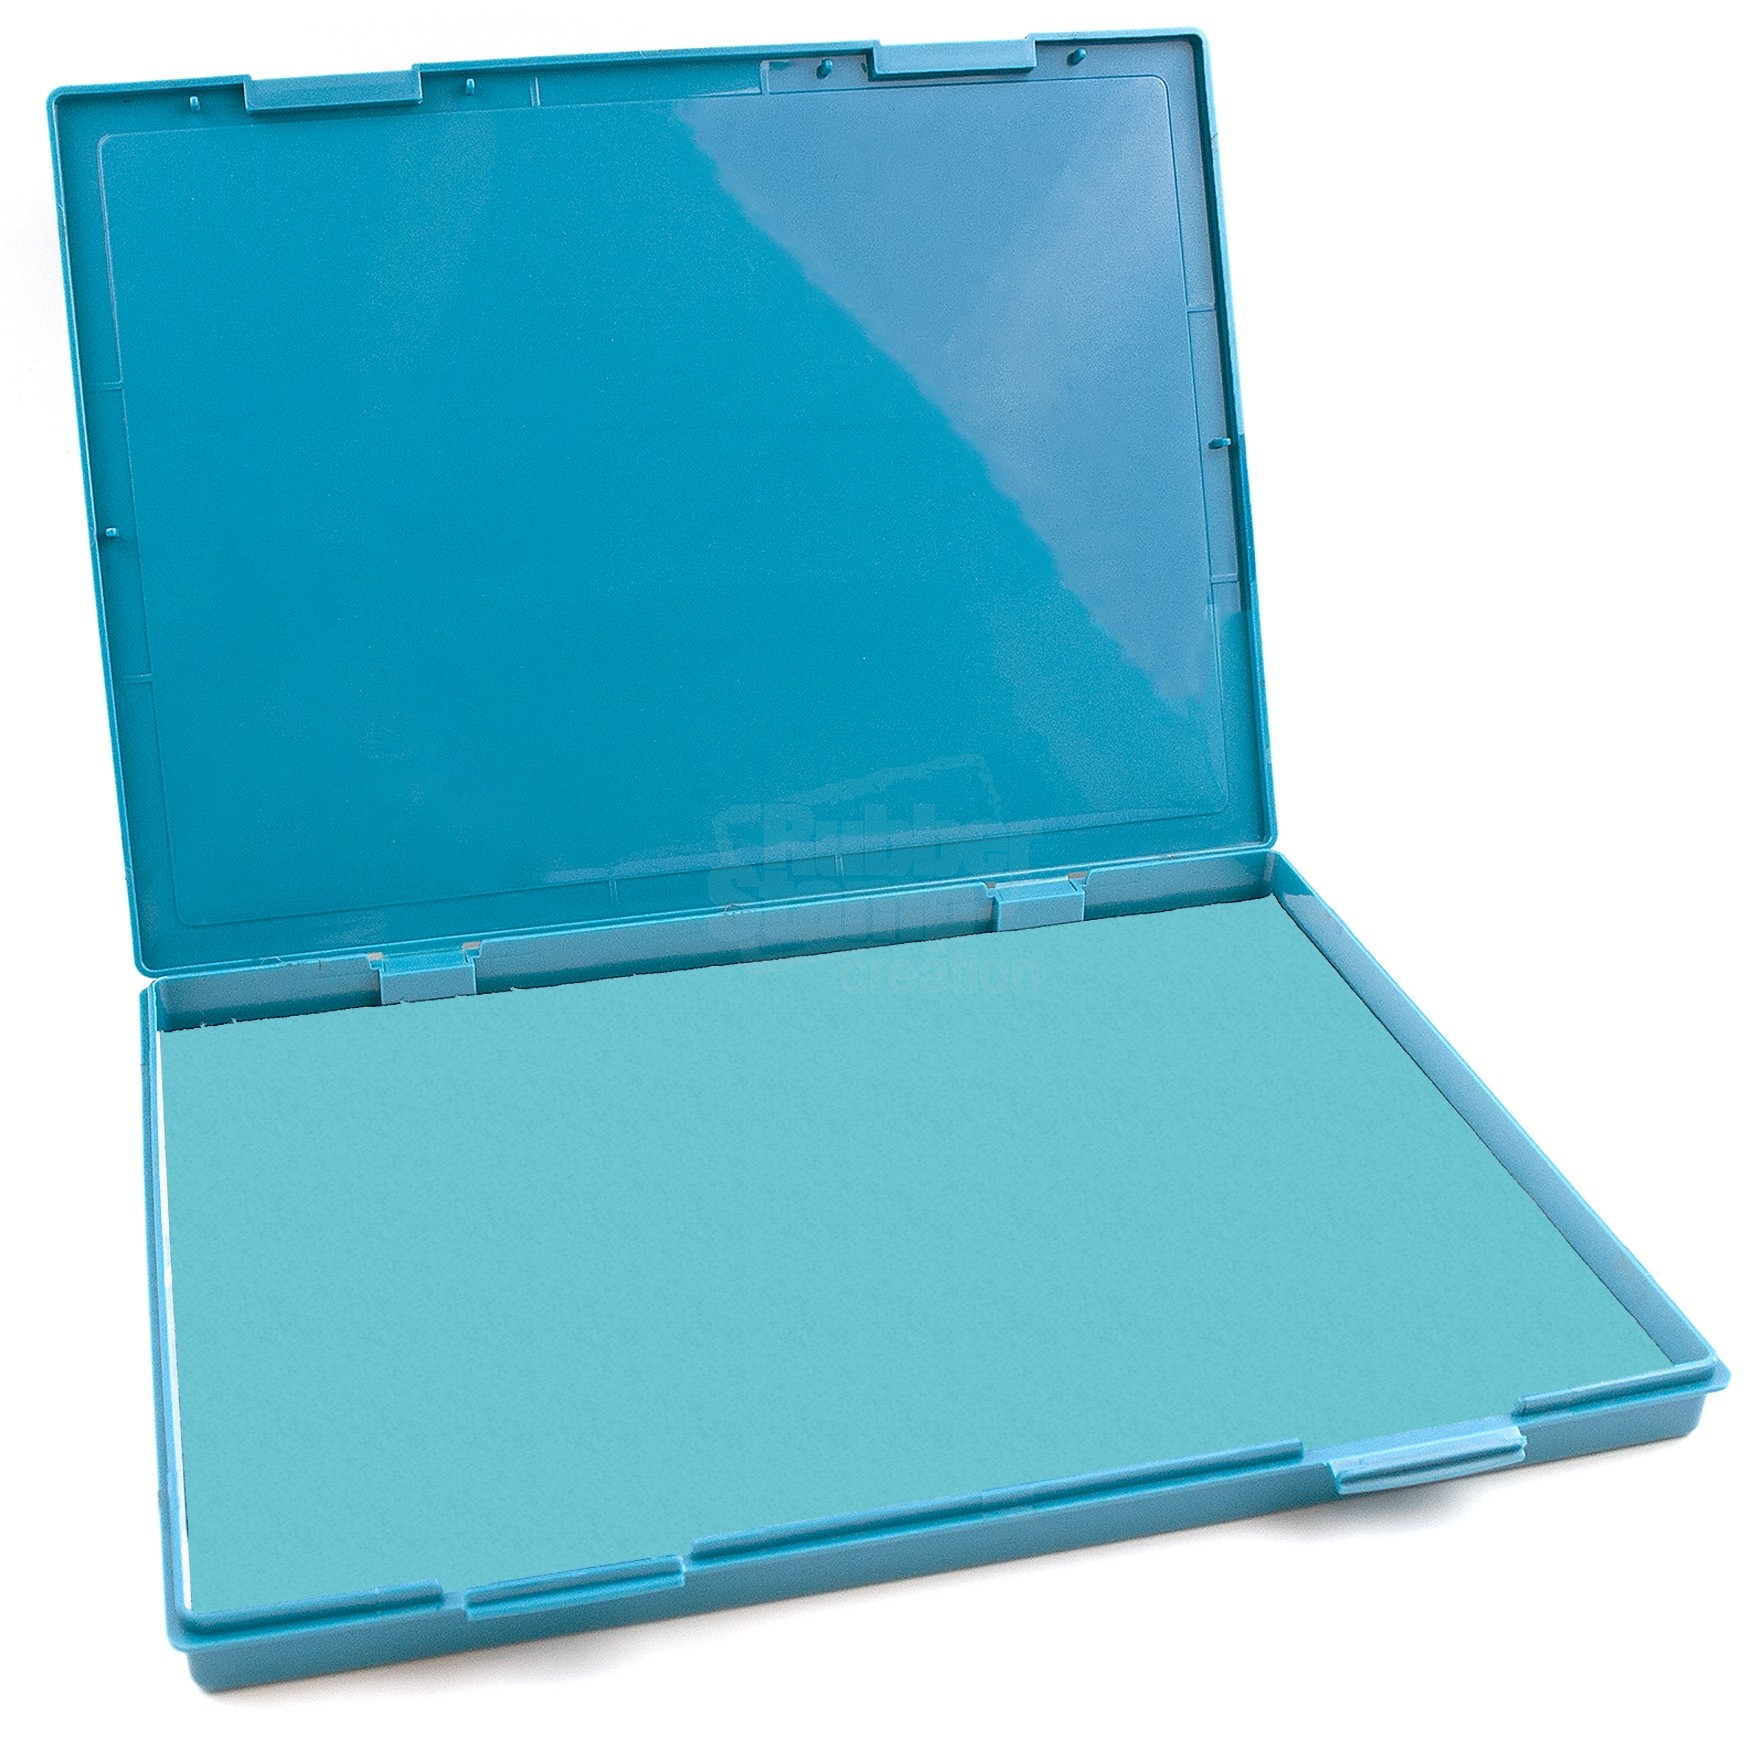 Ink Pad for Rubber Stamps, Stamp Pad for Clear Impression Stamping, Quality  Felt